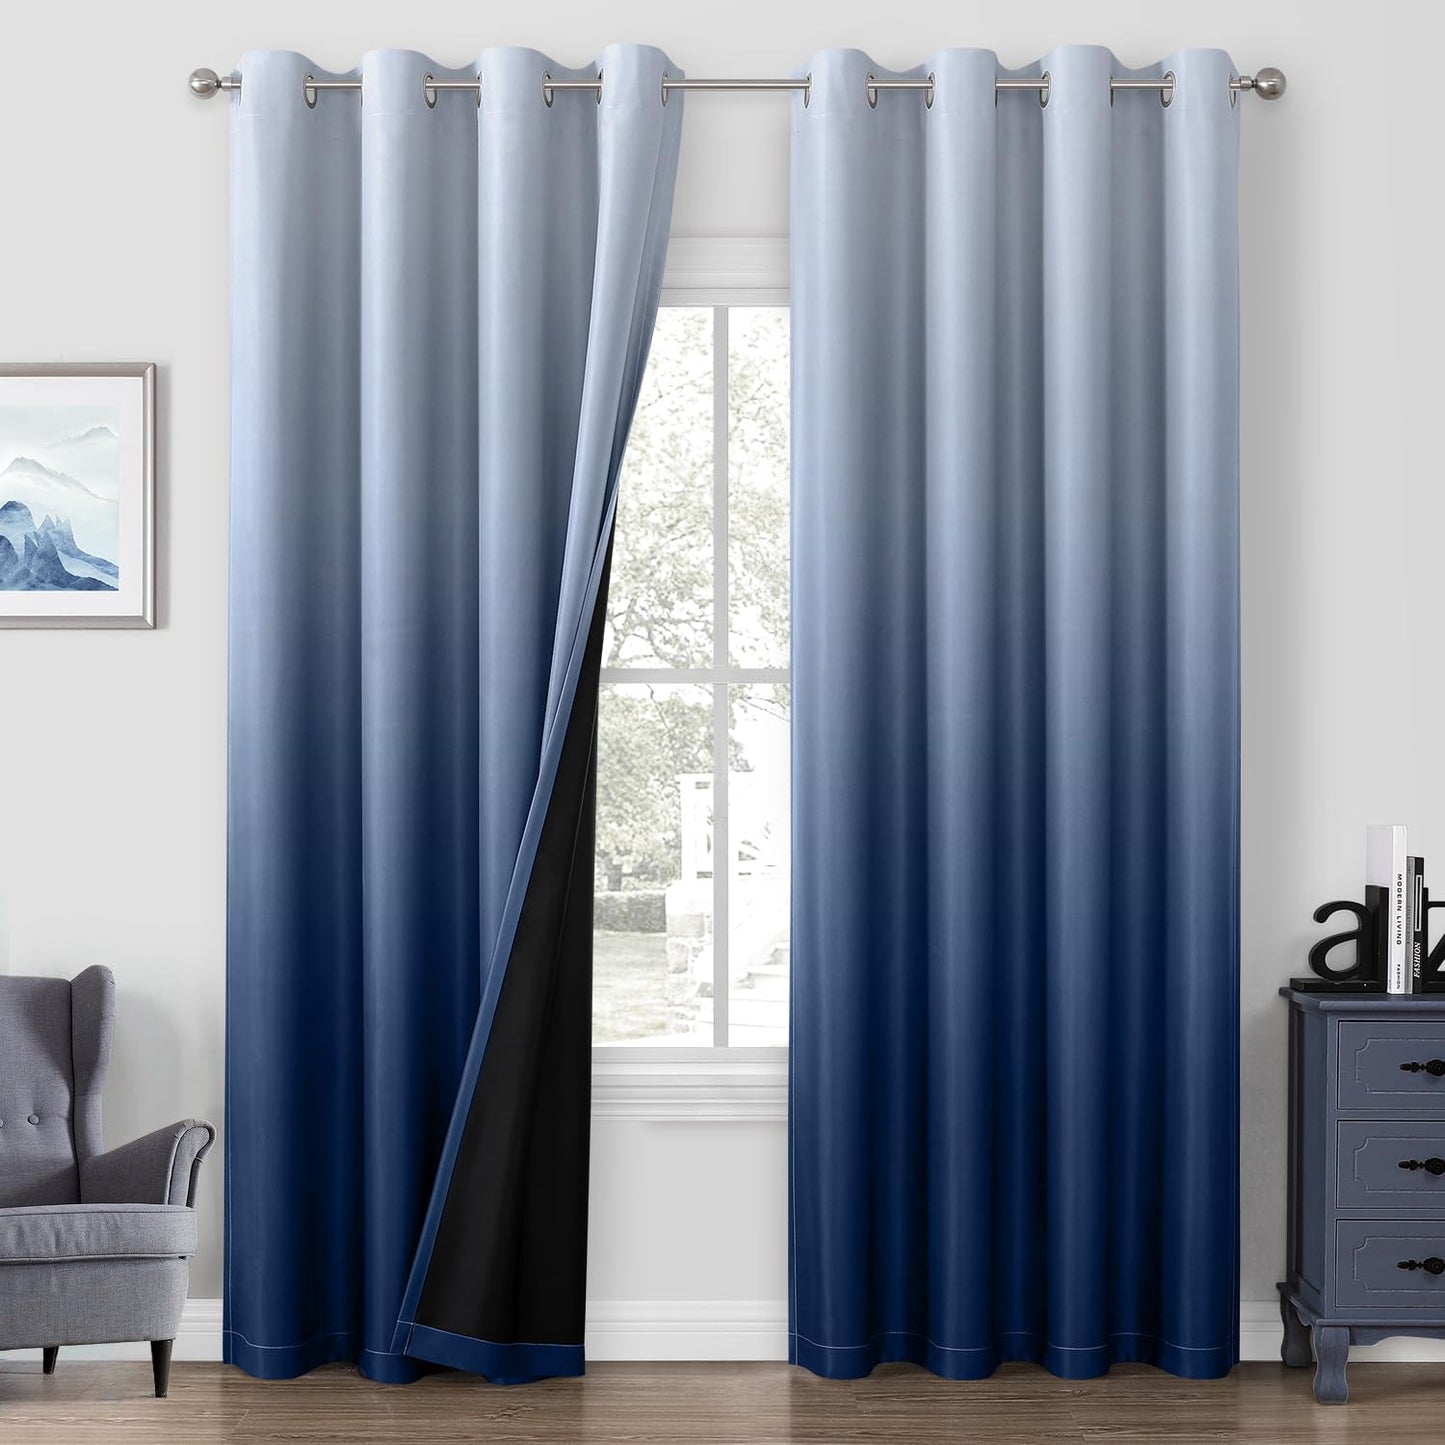 HOMEIDEAS 100% Black Ombre Blackout Curtains for Bedroom, Room Darkening Curtains 52 X 84 Inches Long Grommet Gradient Drapes, Light Blocking Thermal Insulated Curtains for Living Room, 2 Panels  HOMEIDEAS Navy Blue 2 Panel-52" X 96" 